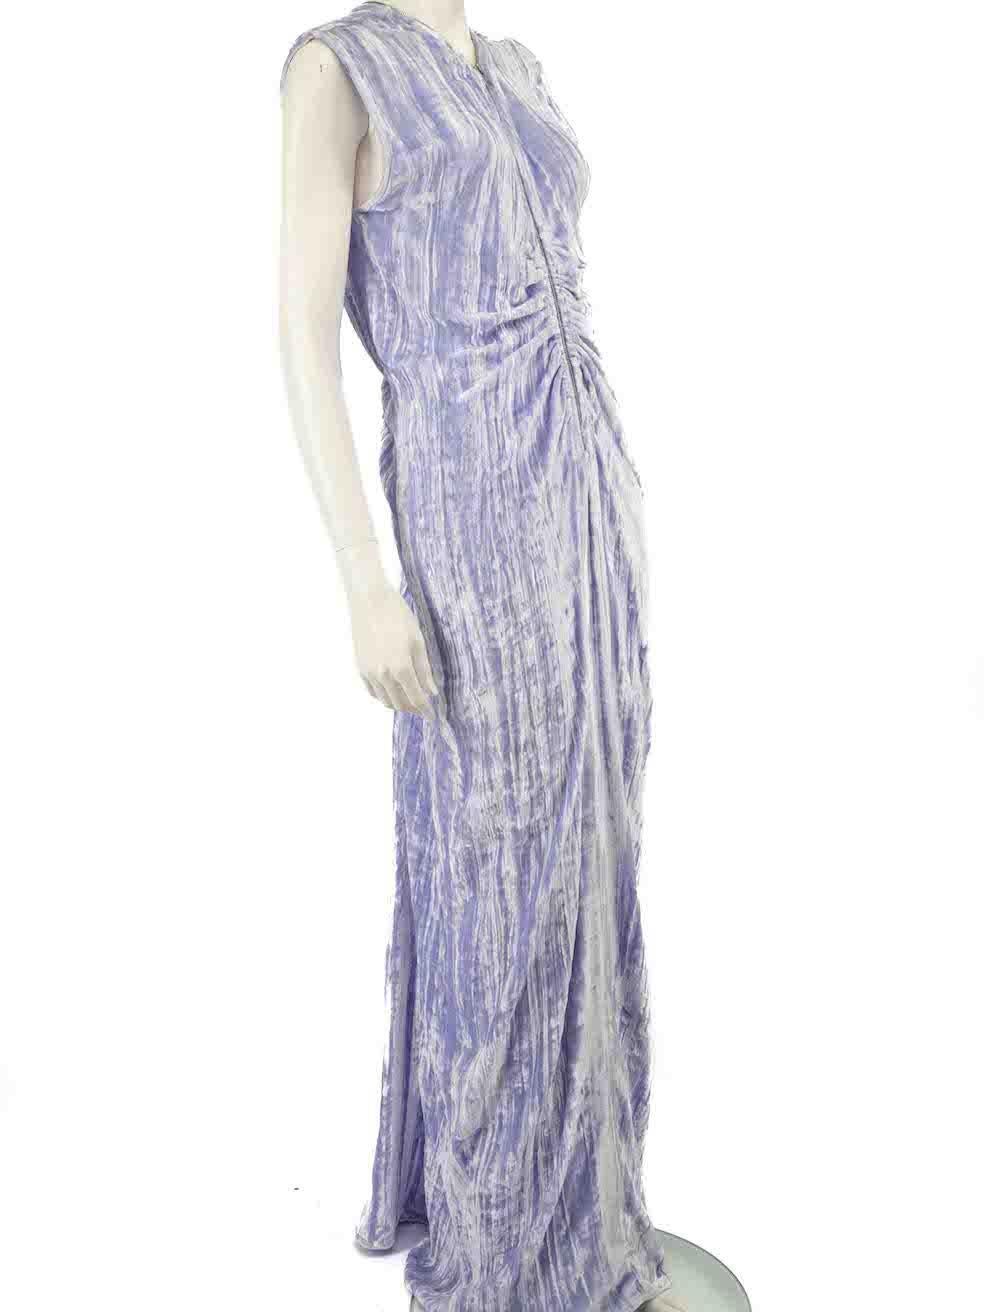 CONDITION is Very good. Minimal wear to dress is evident. Minimal discolouration to rear near zip, lining of rear neck and internal hemline on this used Bottega Veneta designer resale item.
 
 
 
 Details
 
 
 Lilac
 
 Velvet
 
 Gown
 
 V-neck
 
